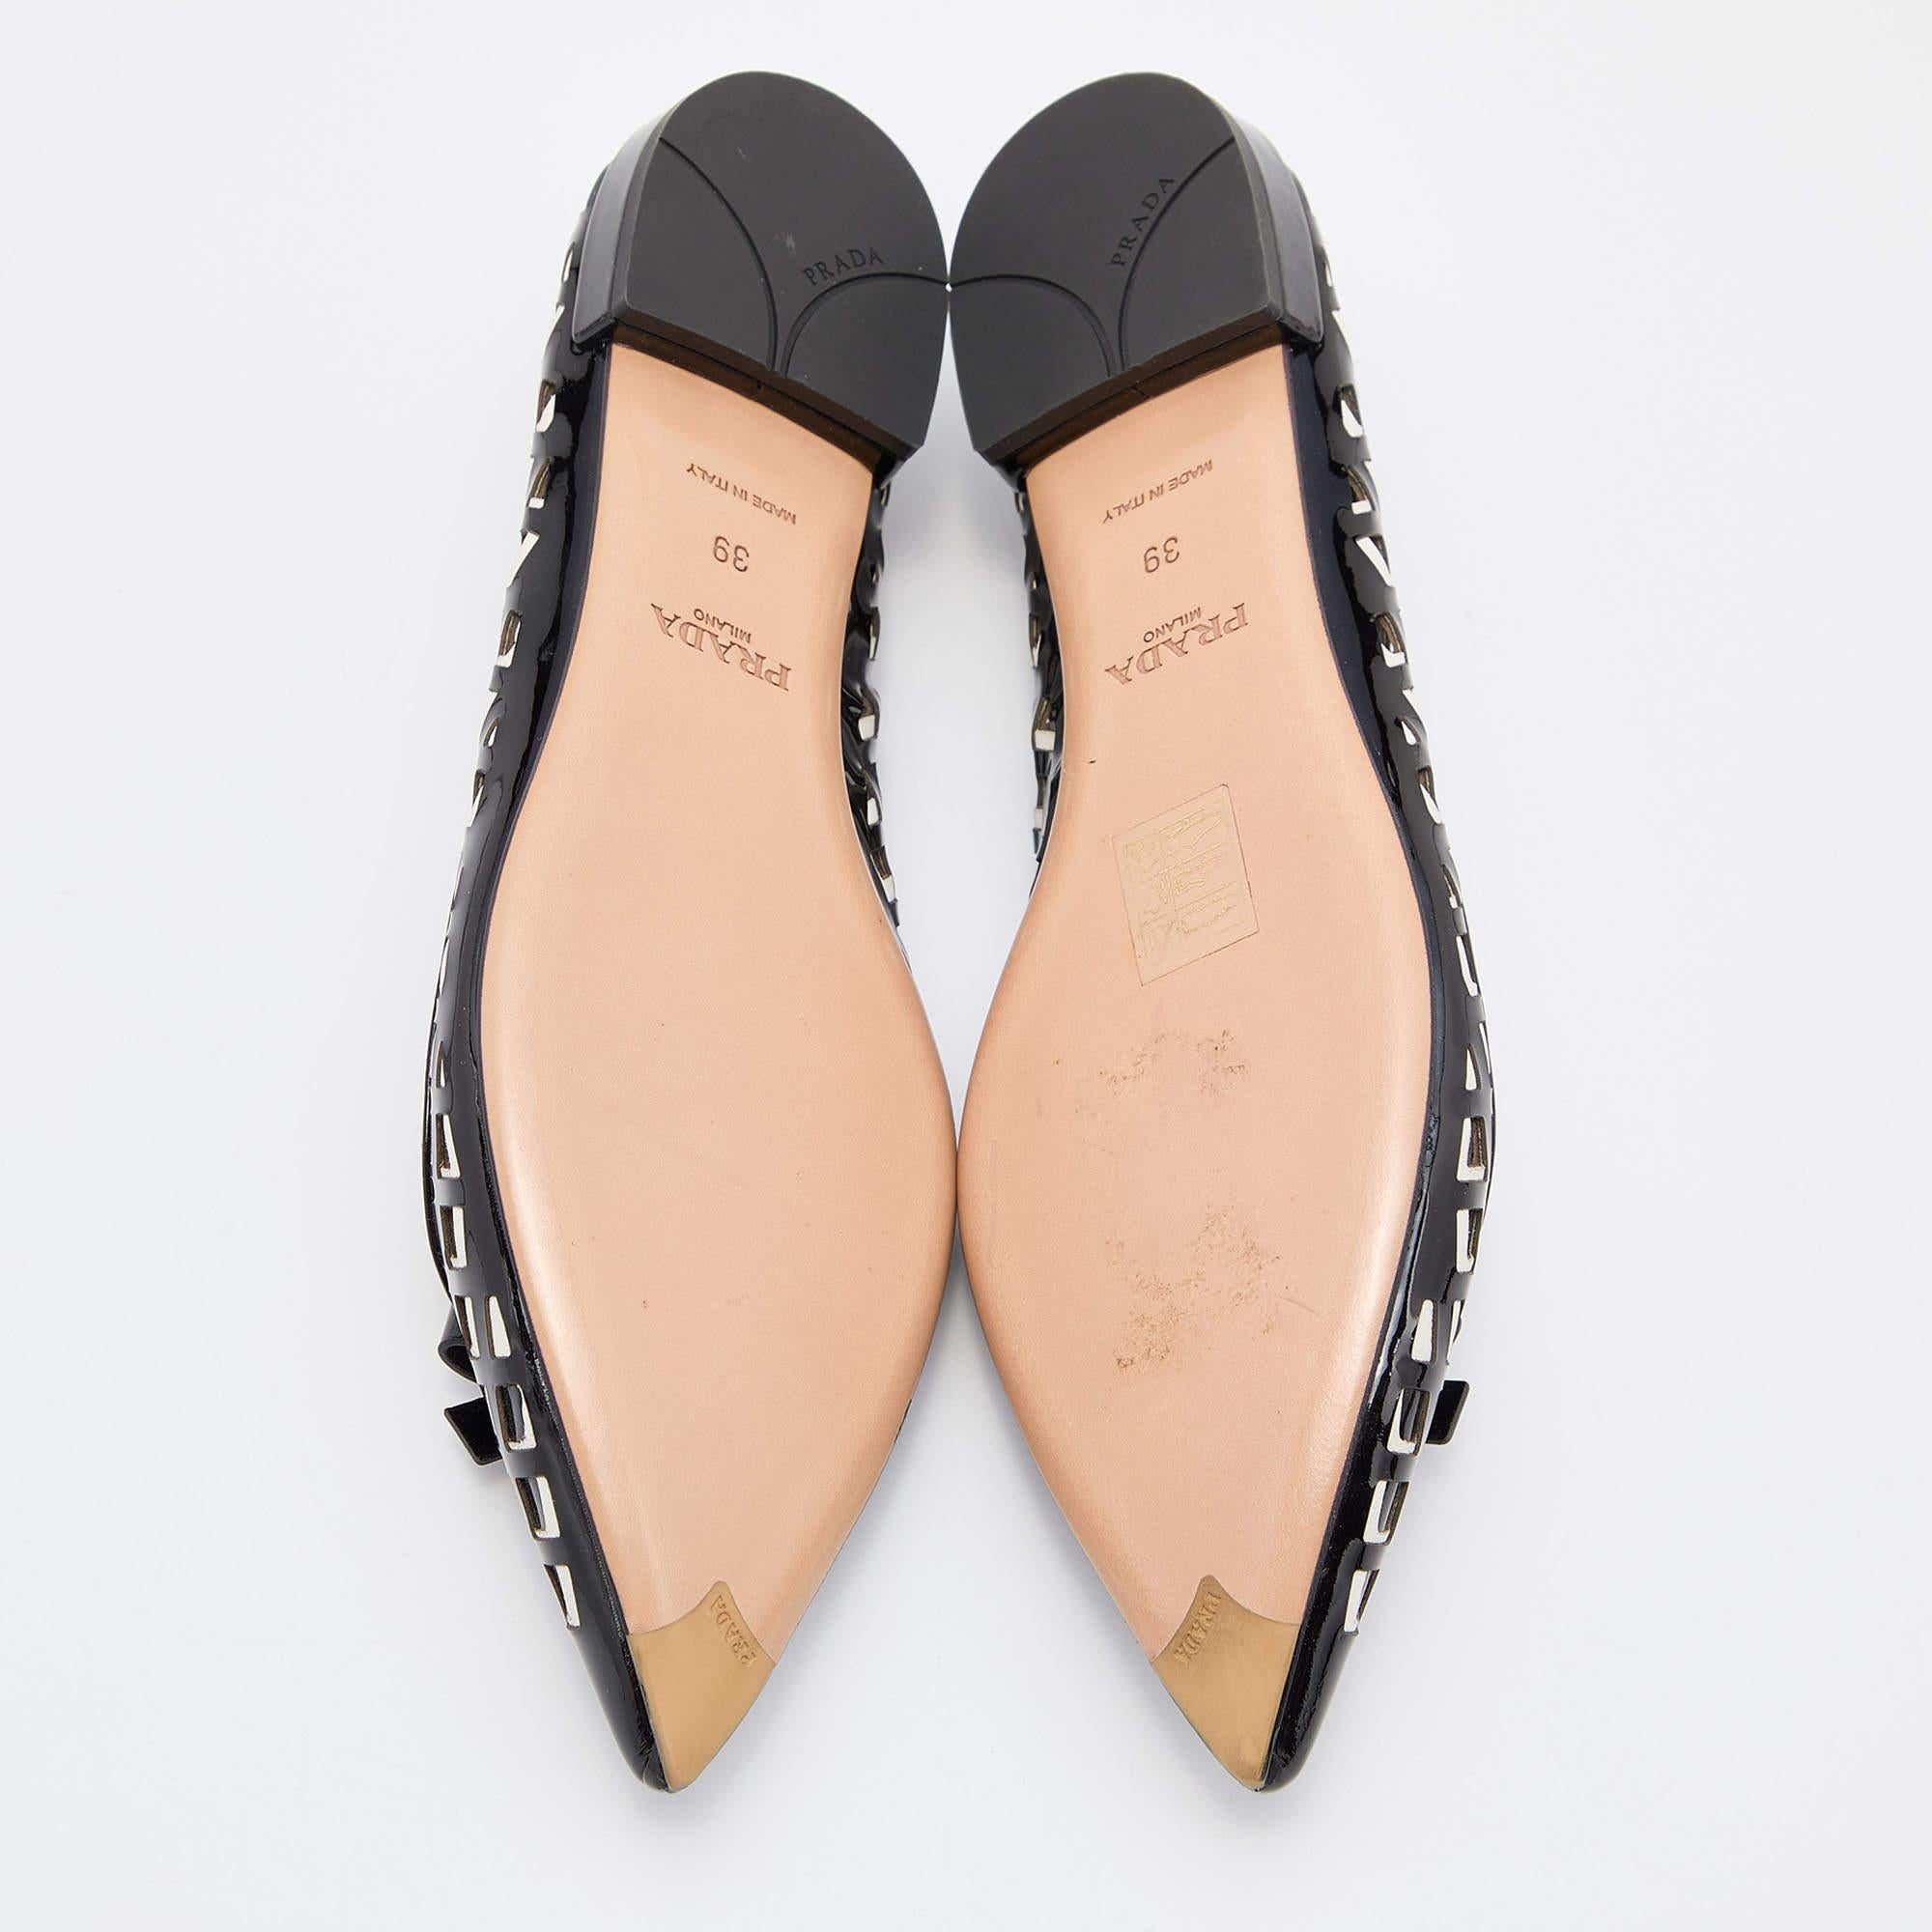 Complete your look by adding these designer ballet flats to your collection of everyday footwear. They are crafted skilfully to grant the perfect fit and style.

